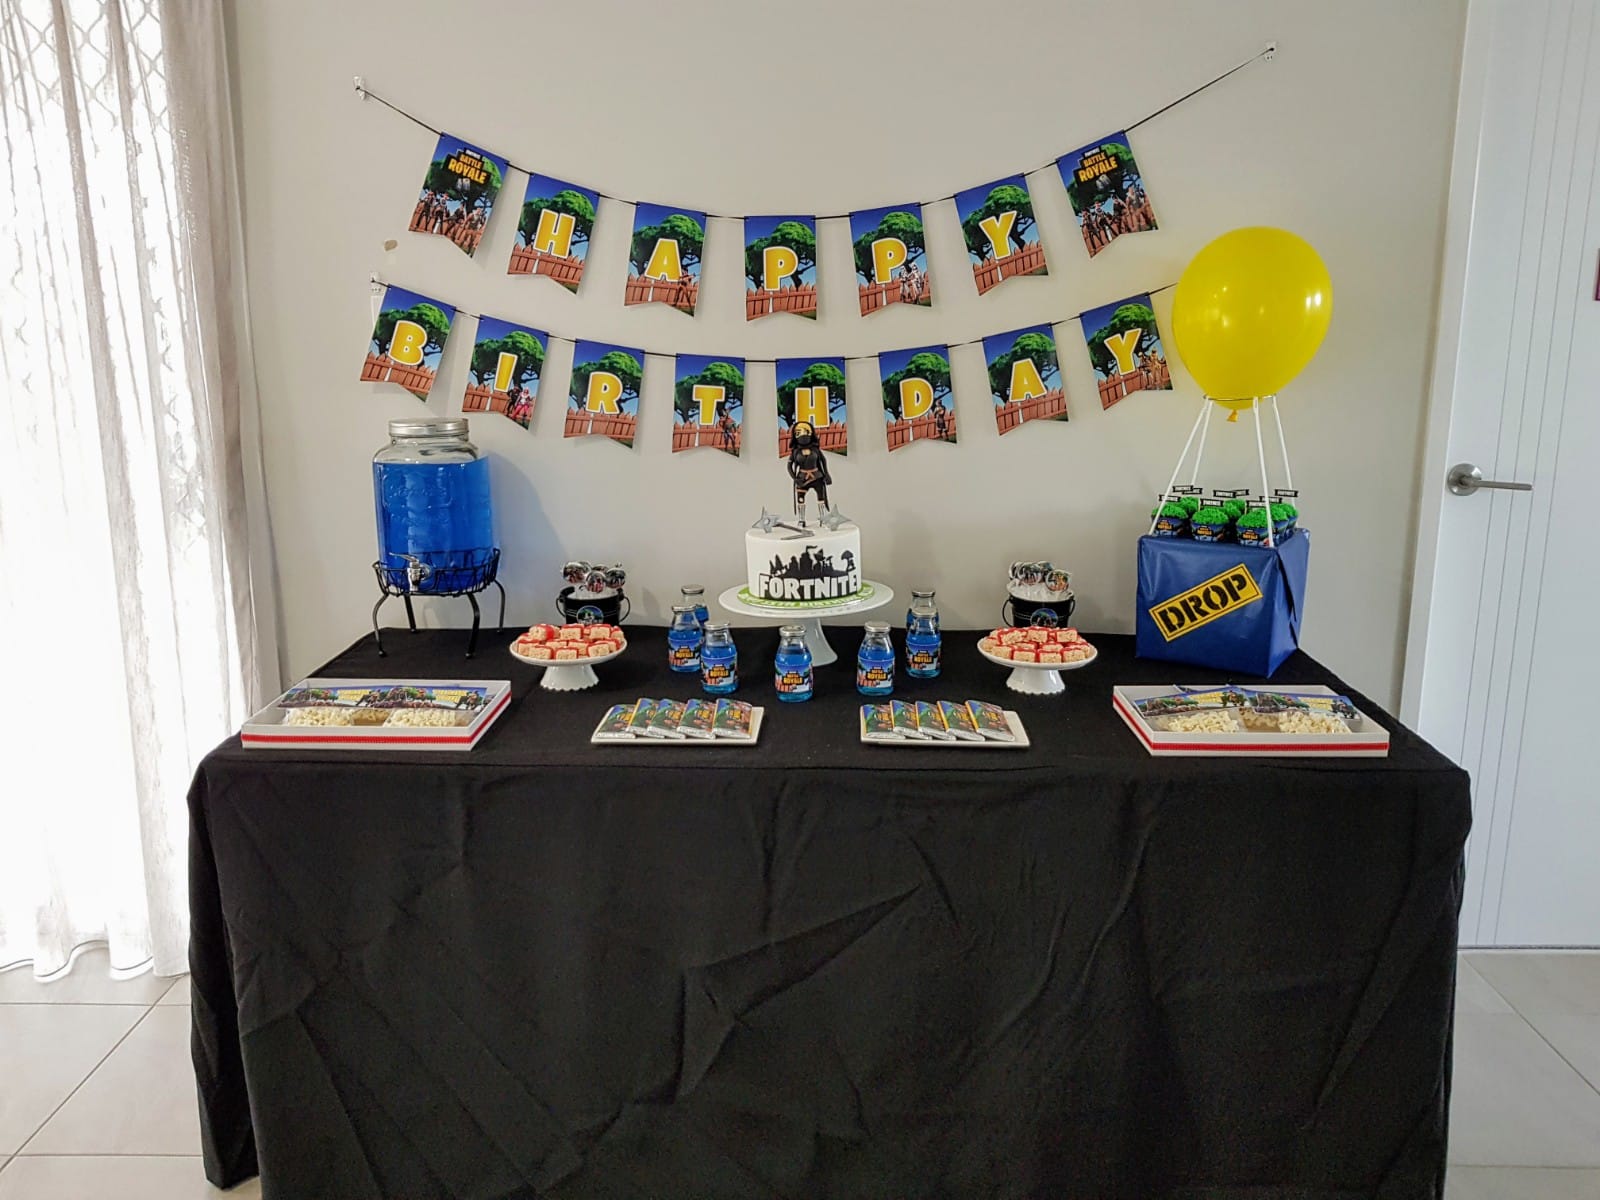  Fortnite  Birthday  Party  Ideas  and Themed Supplies  